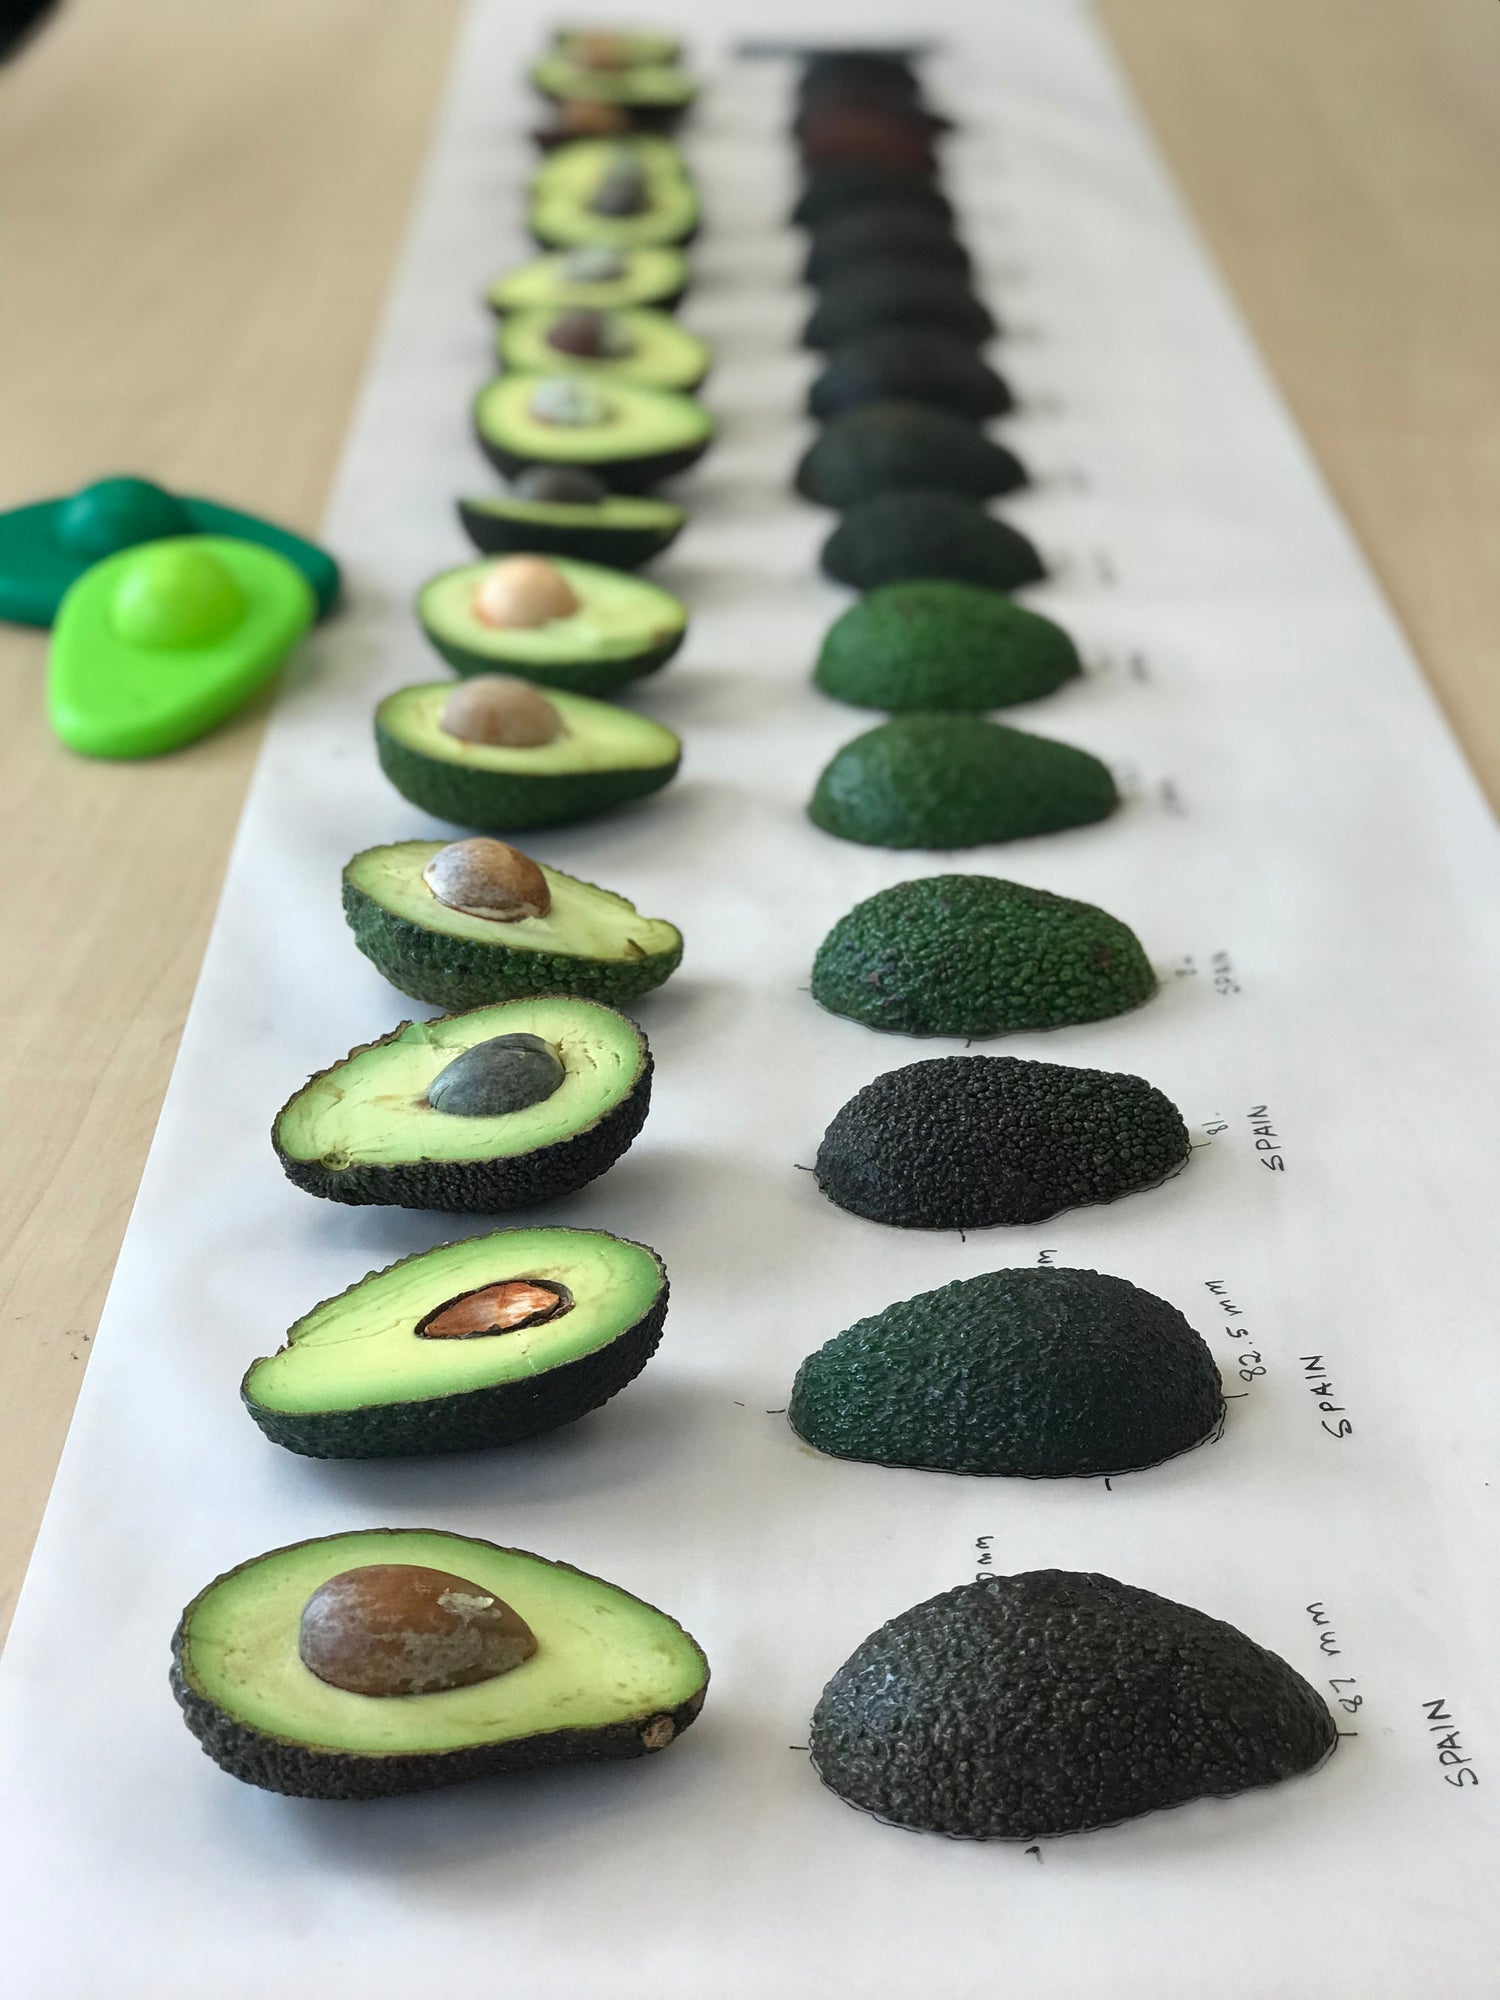 Testing Avocado Hugger to define the best 2 sizes who fit the average avocado